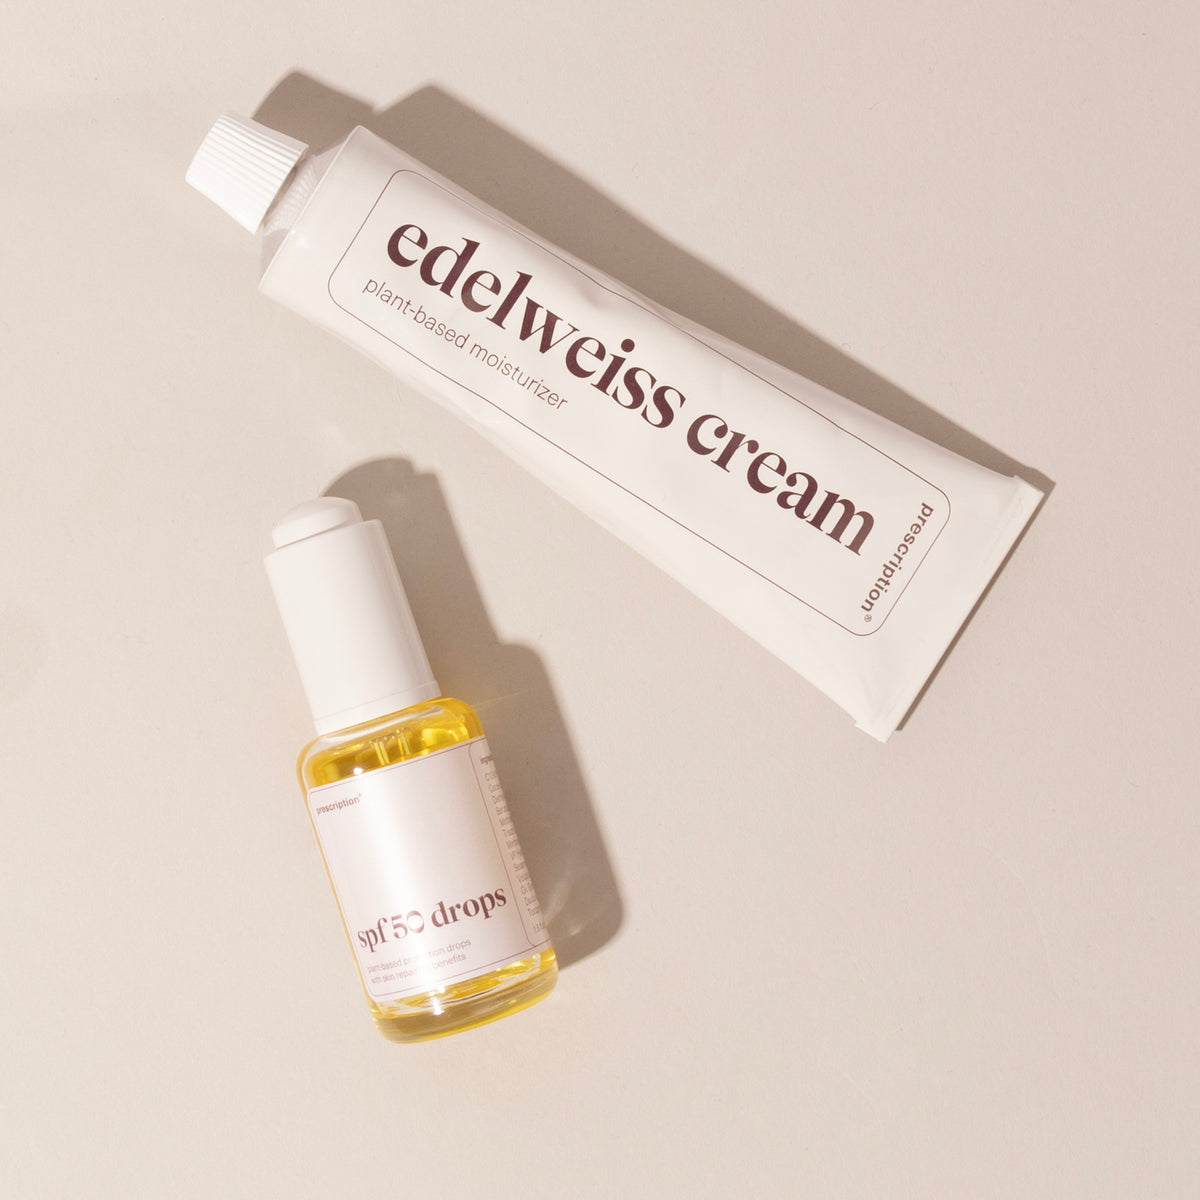 Refreshed Skin Duo